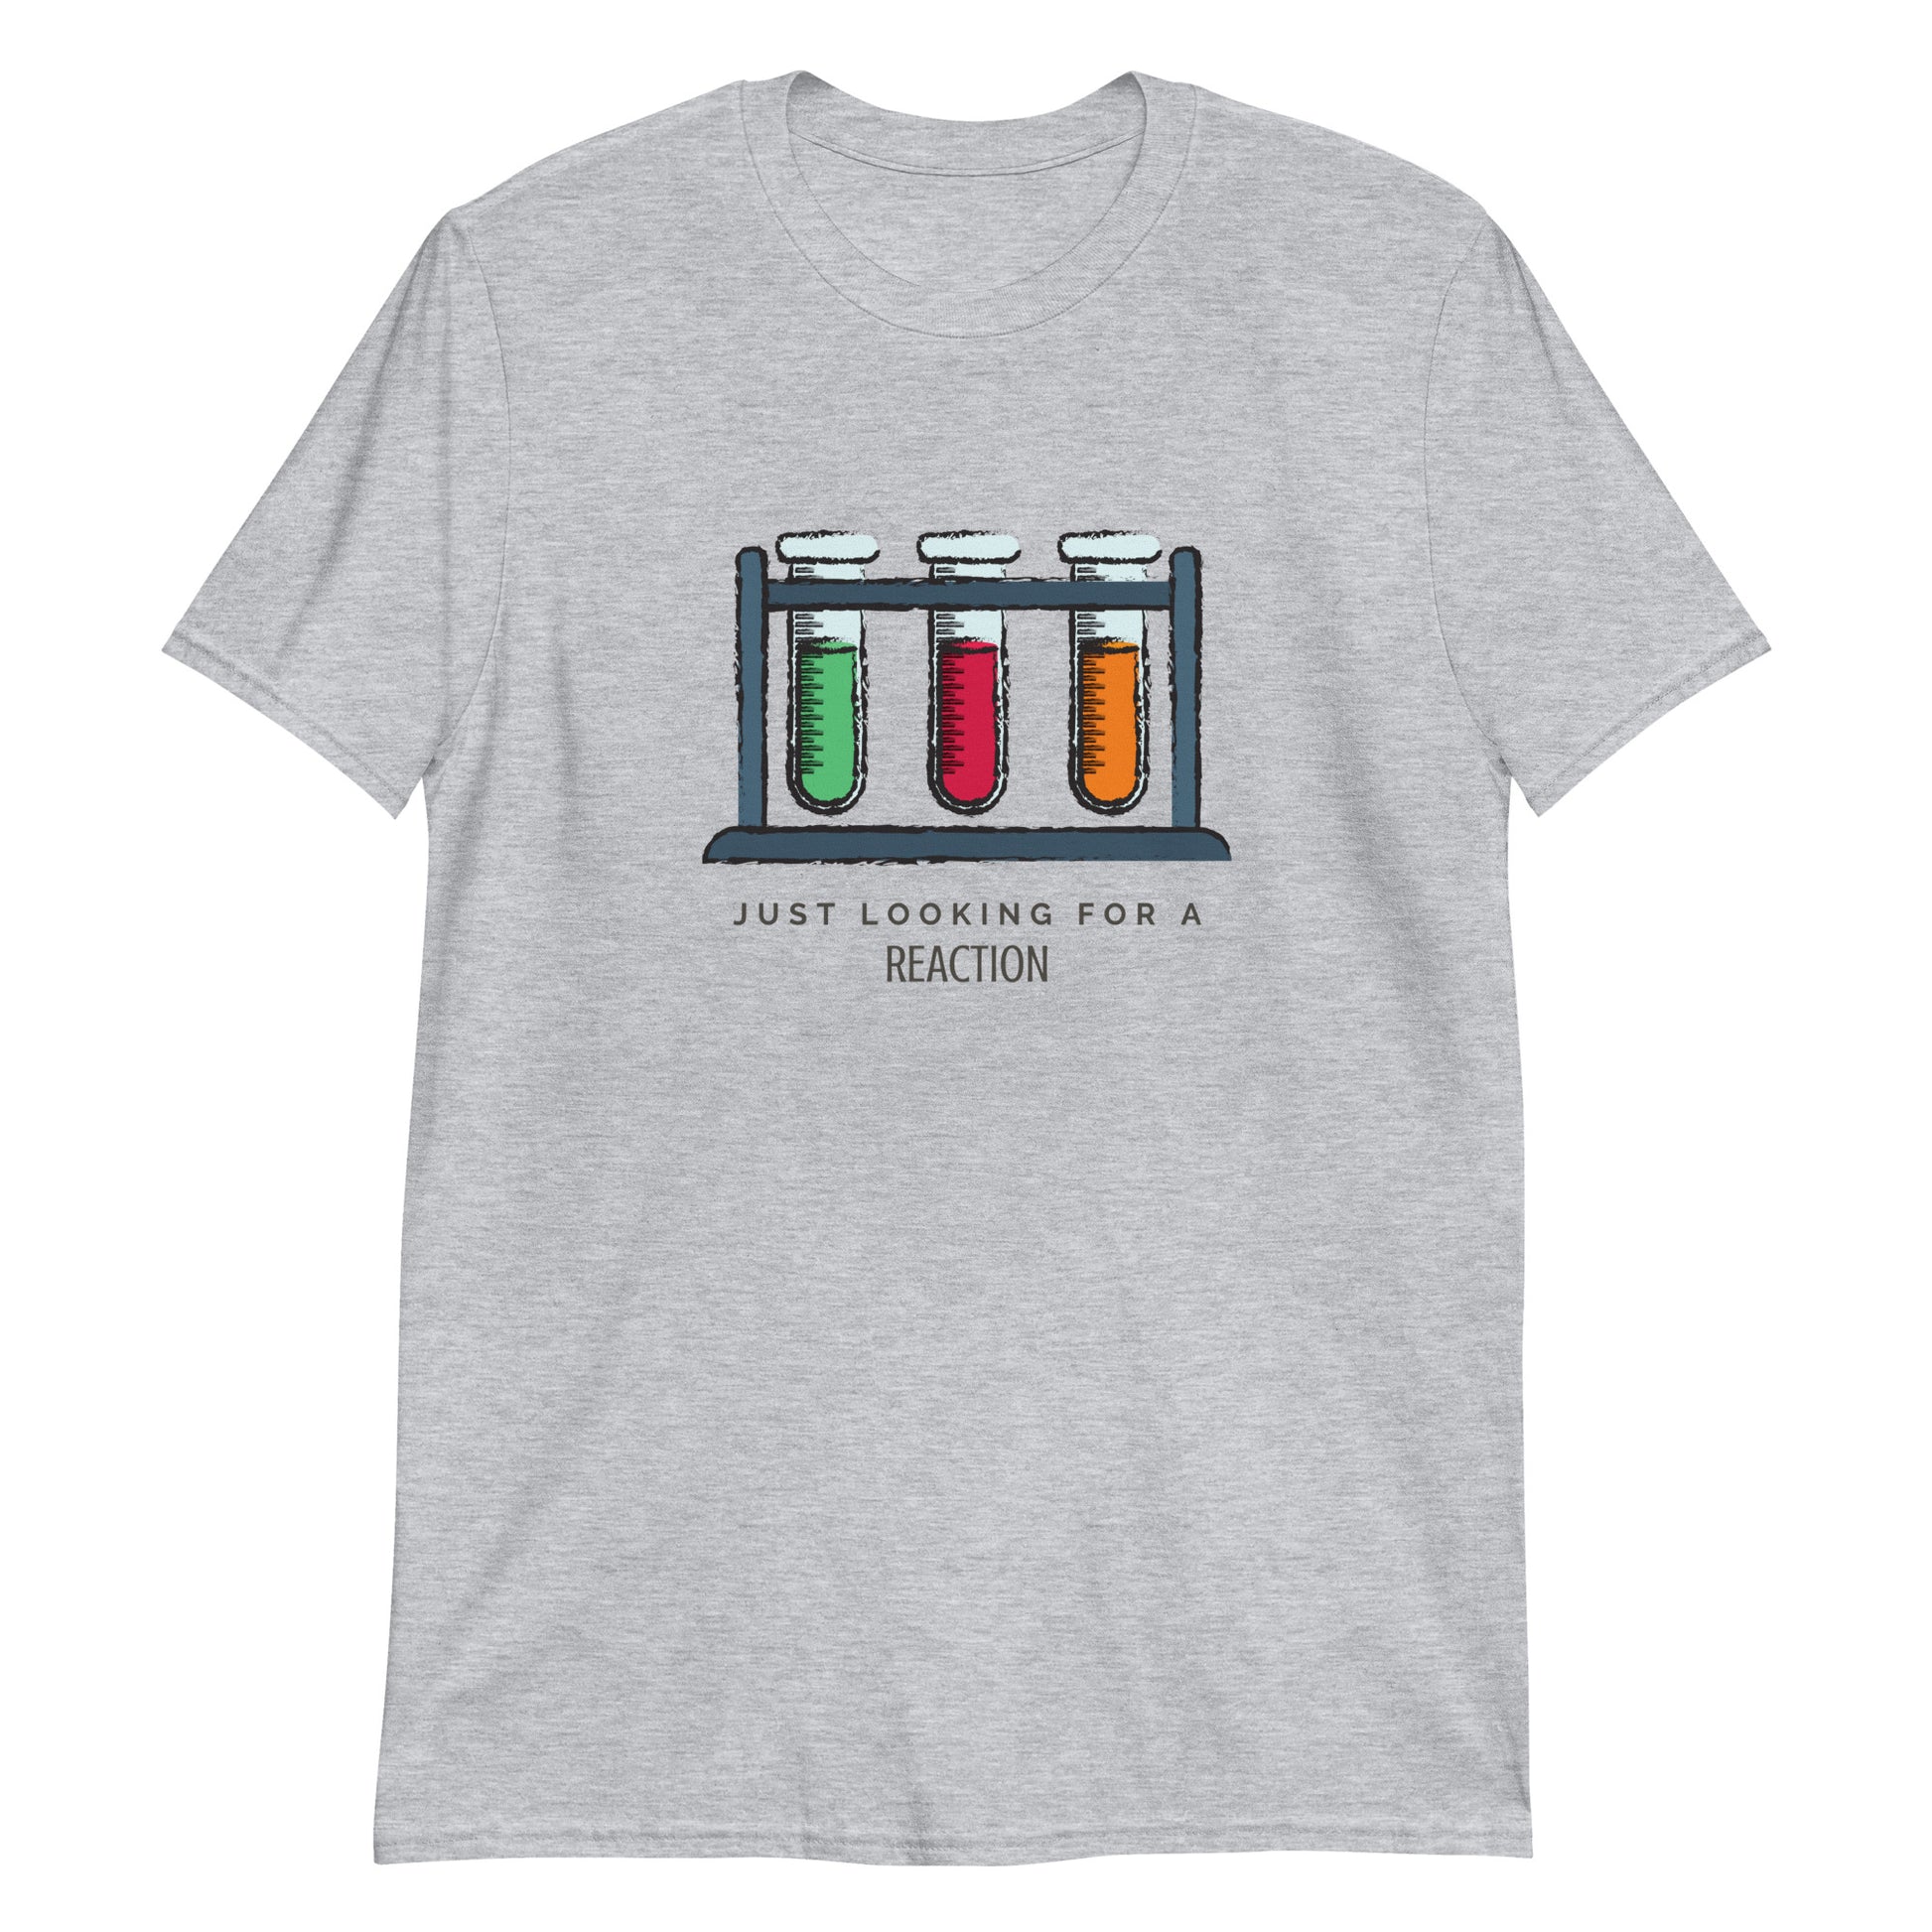 Test Tubes, Just Looking For A Reaction - Short-Sleeve Unisex T-Shirt Sport Grey Unisex T-shirt Science